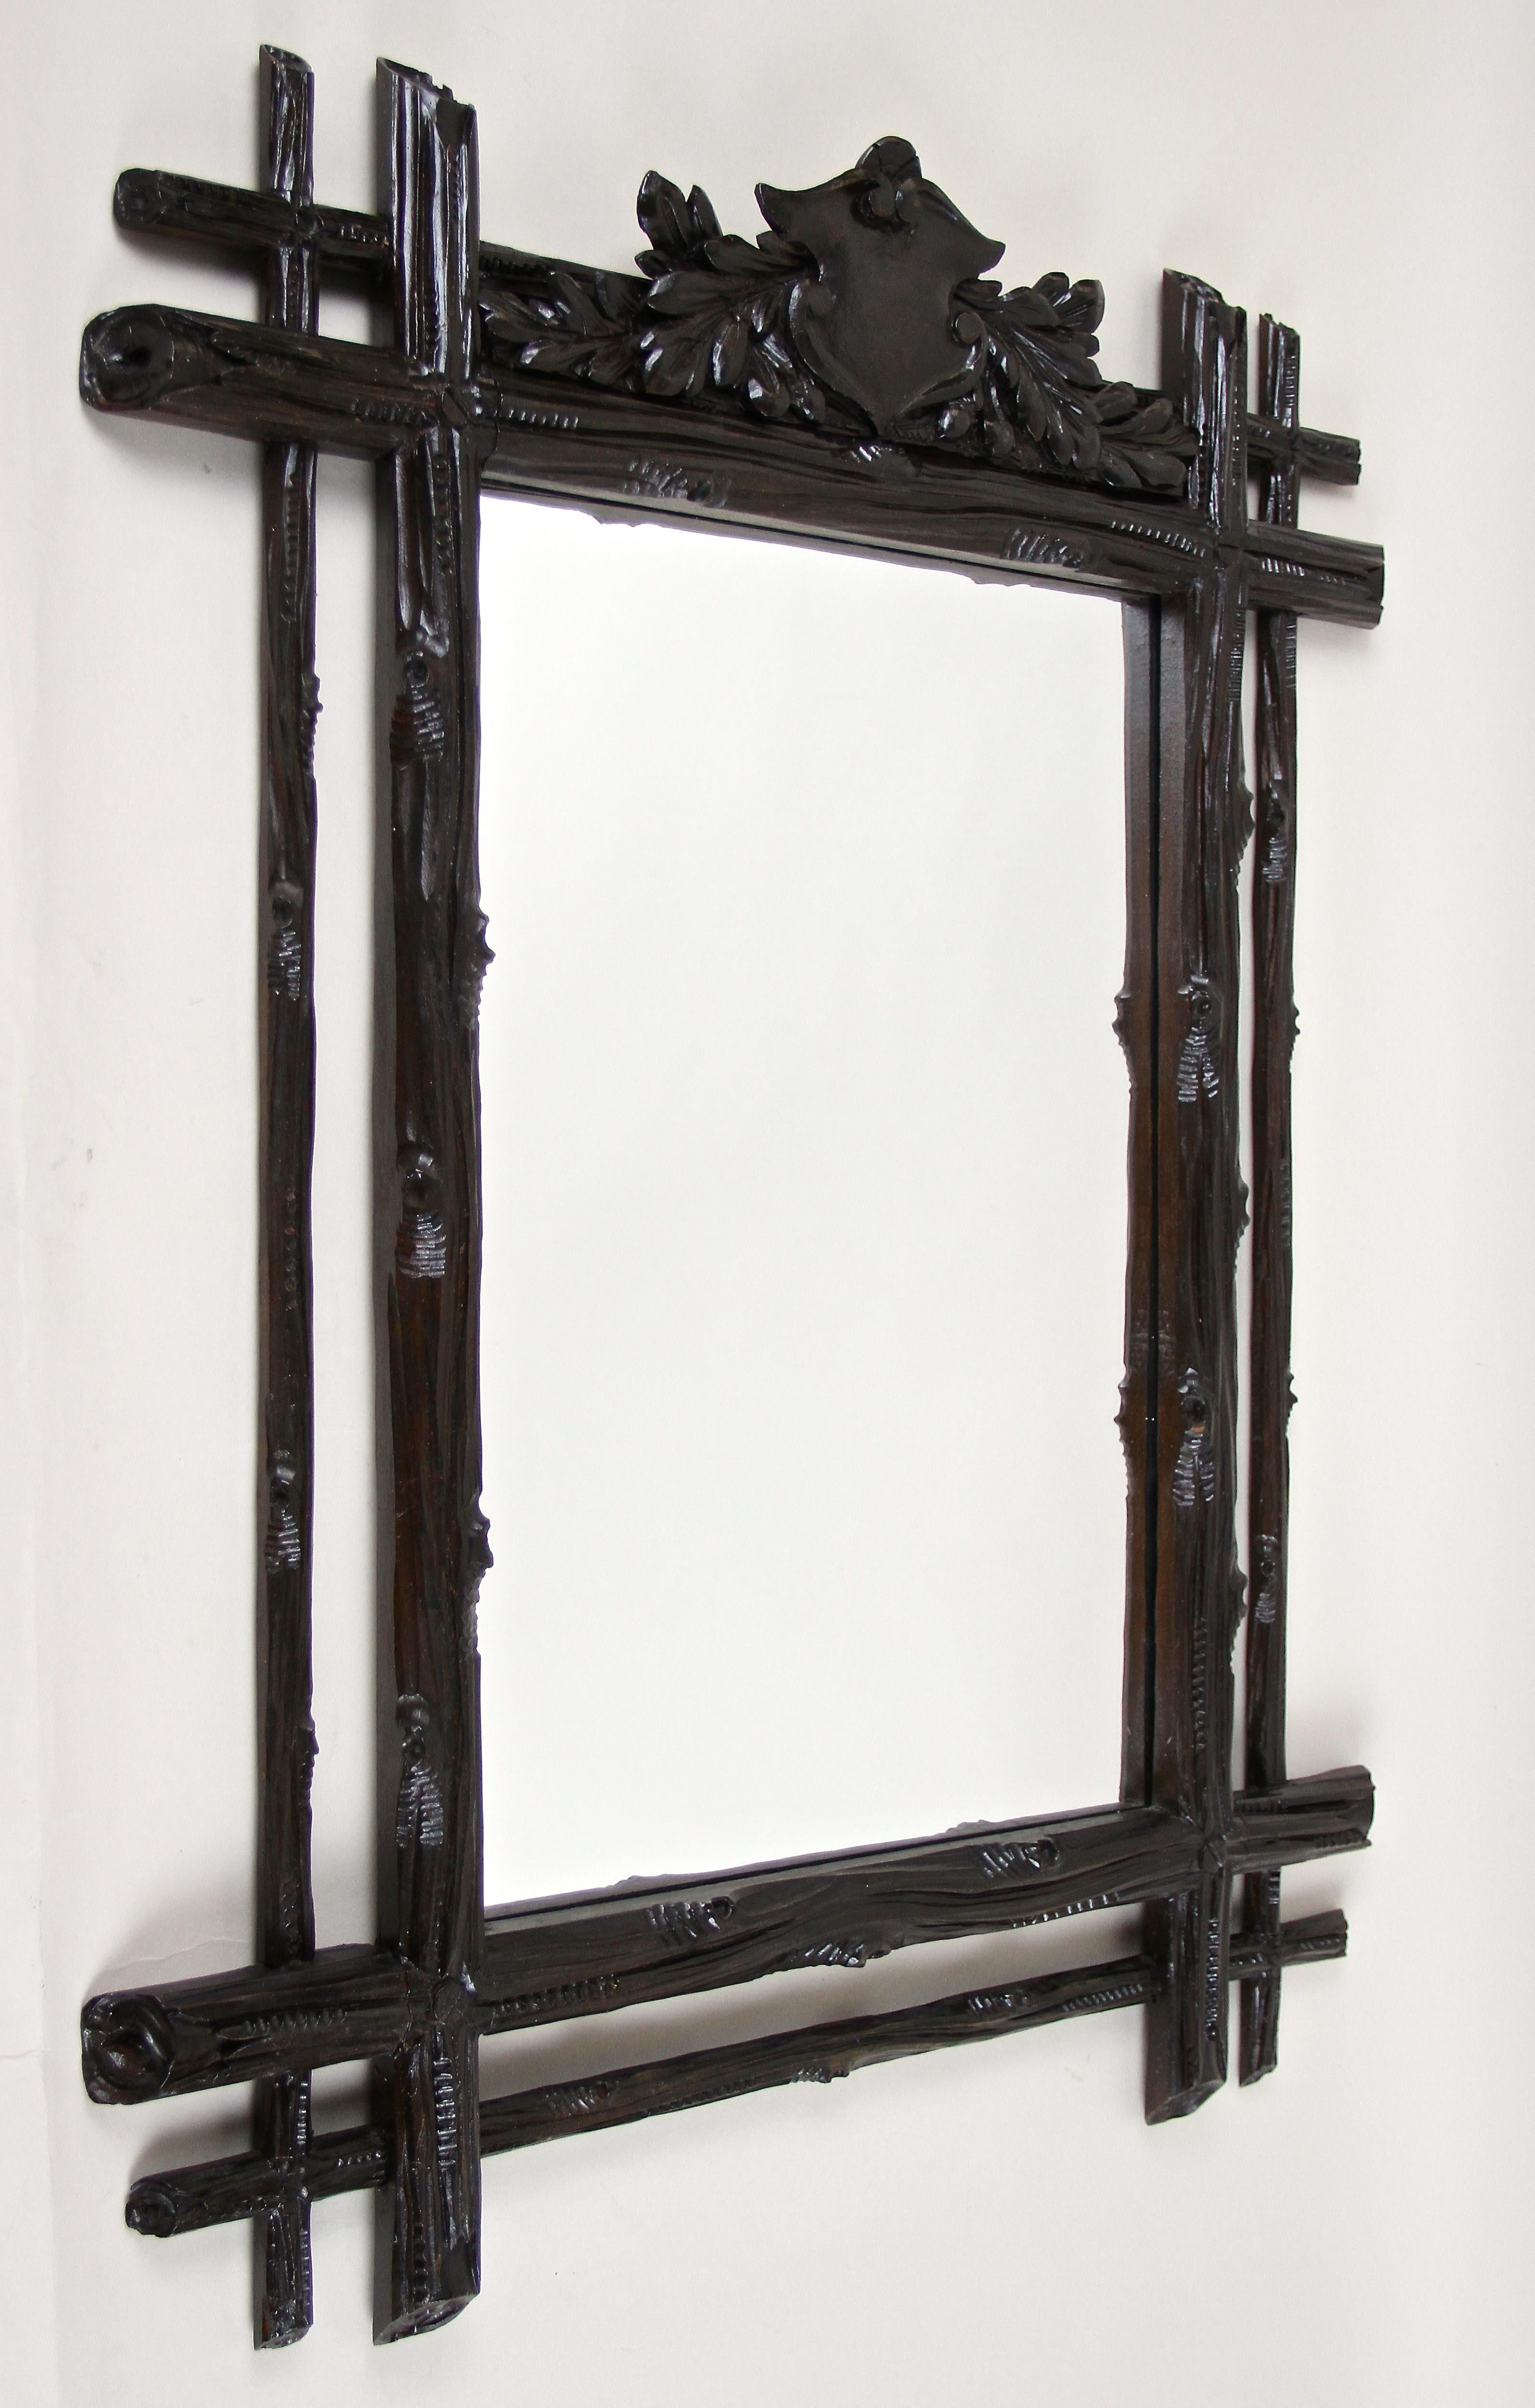 Fantastic looking rustic Black Forest wall mirror from the late 19th century in Austria around 1870. Hand carved out of fine basswood this rural mirror shows an absolute amazing design. The doubled frame with protruding corners impresses with a